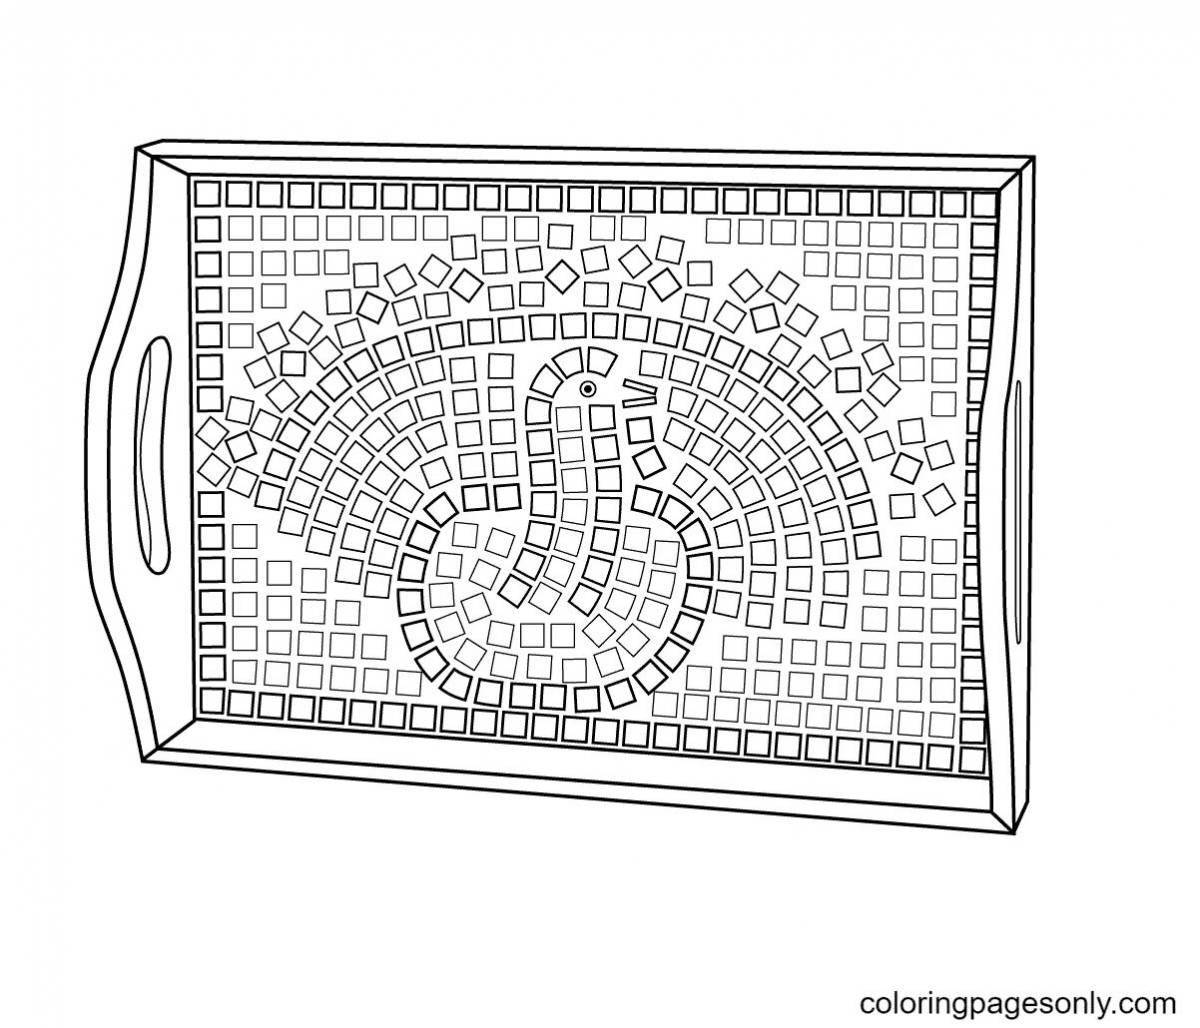 Fun coloring tray for kids